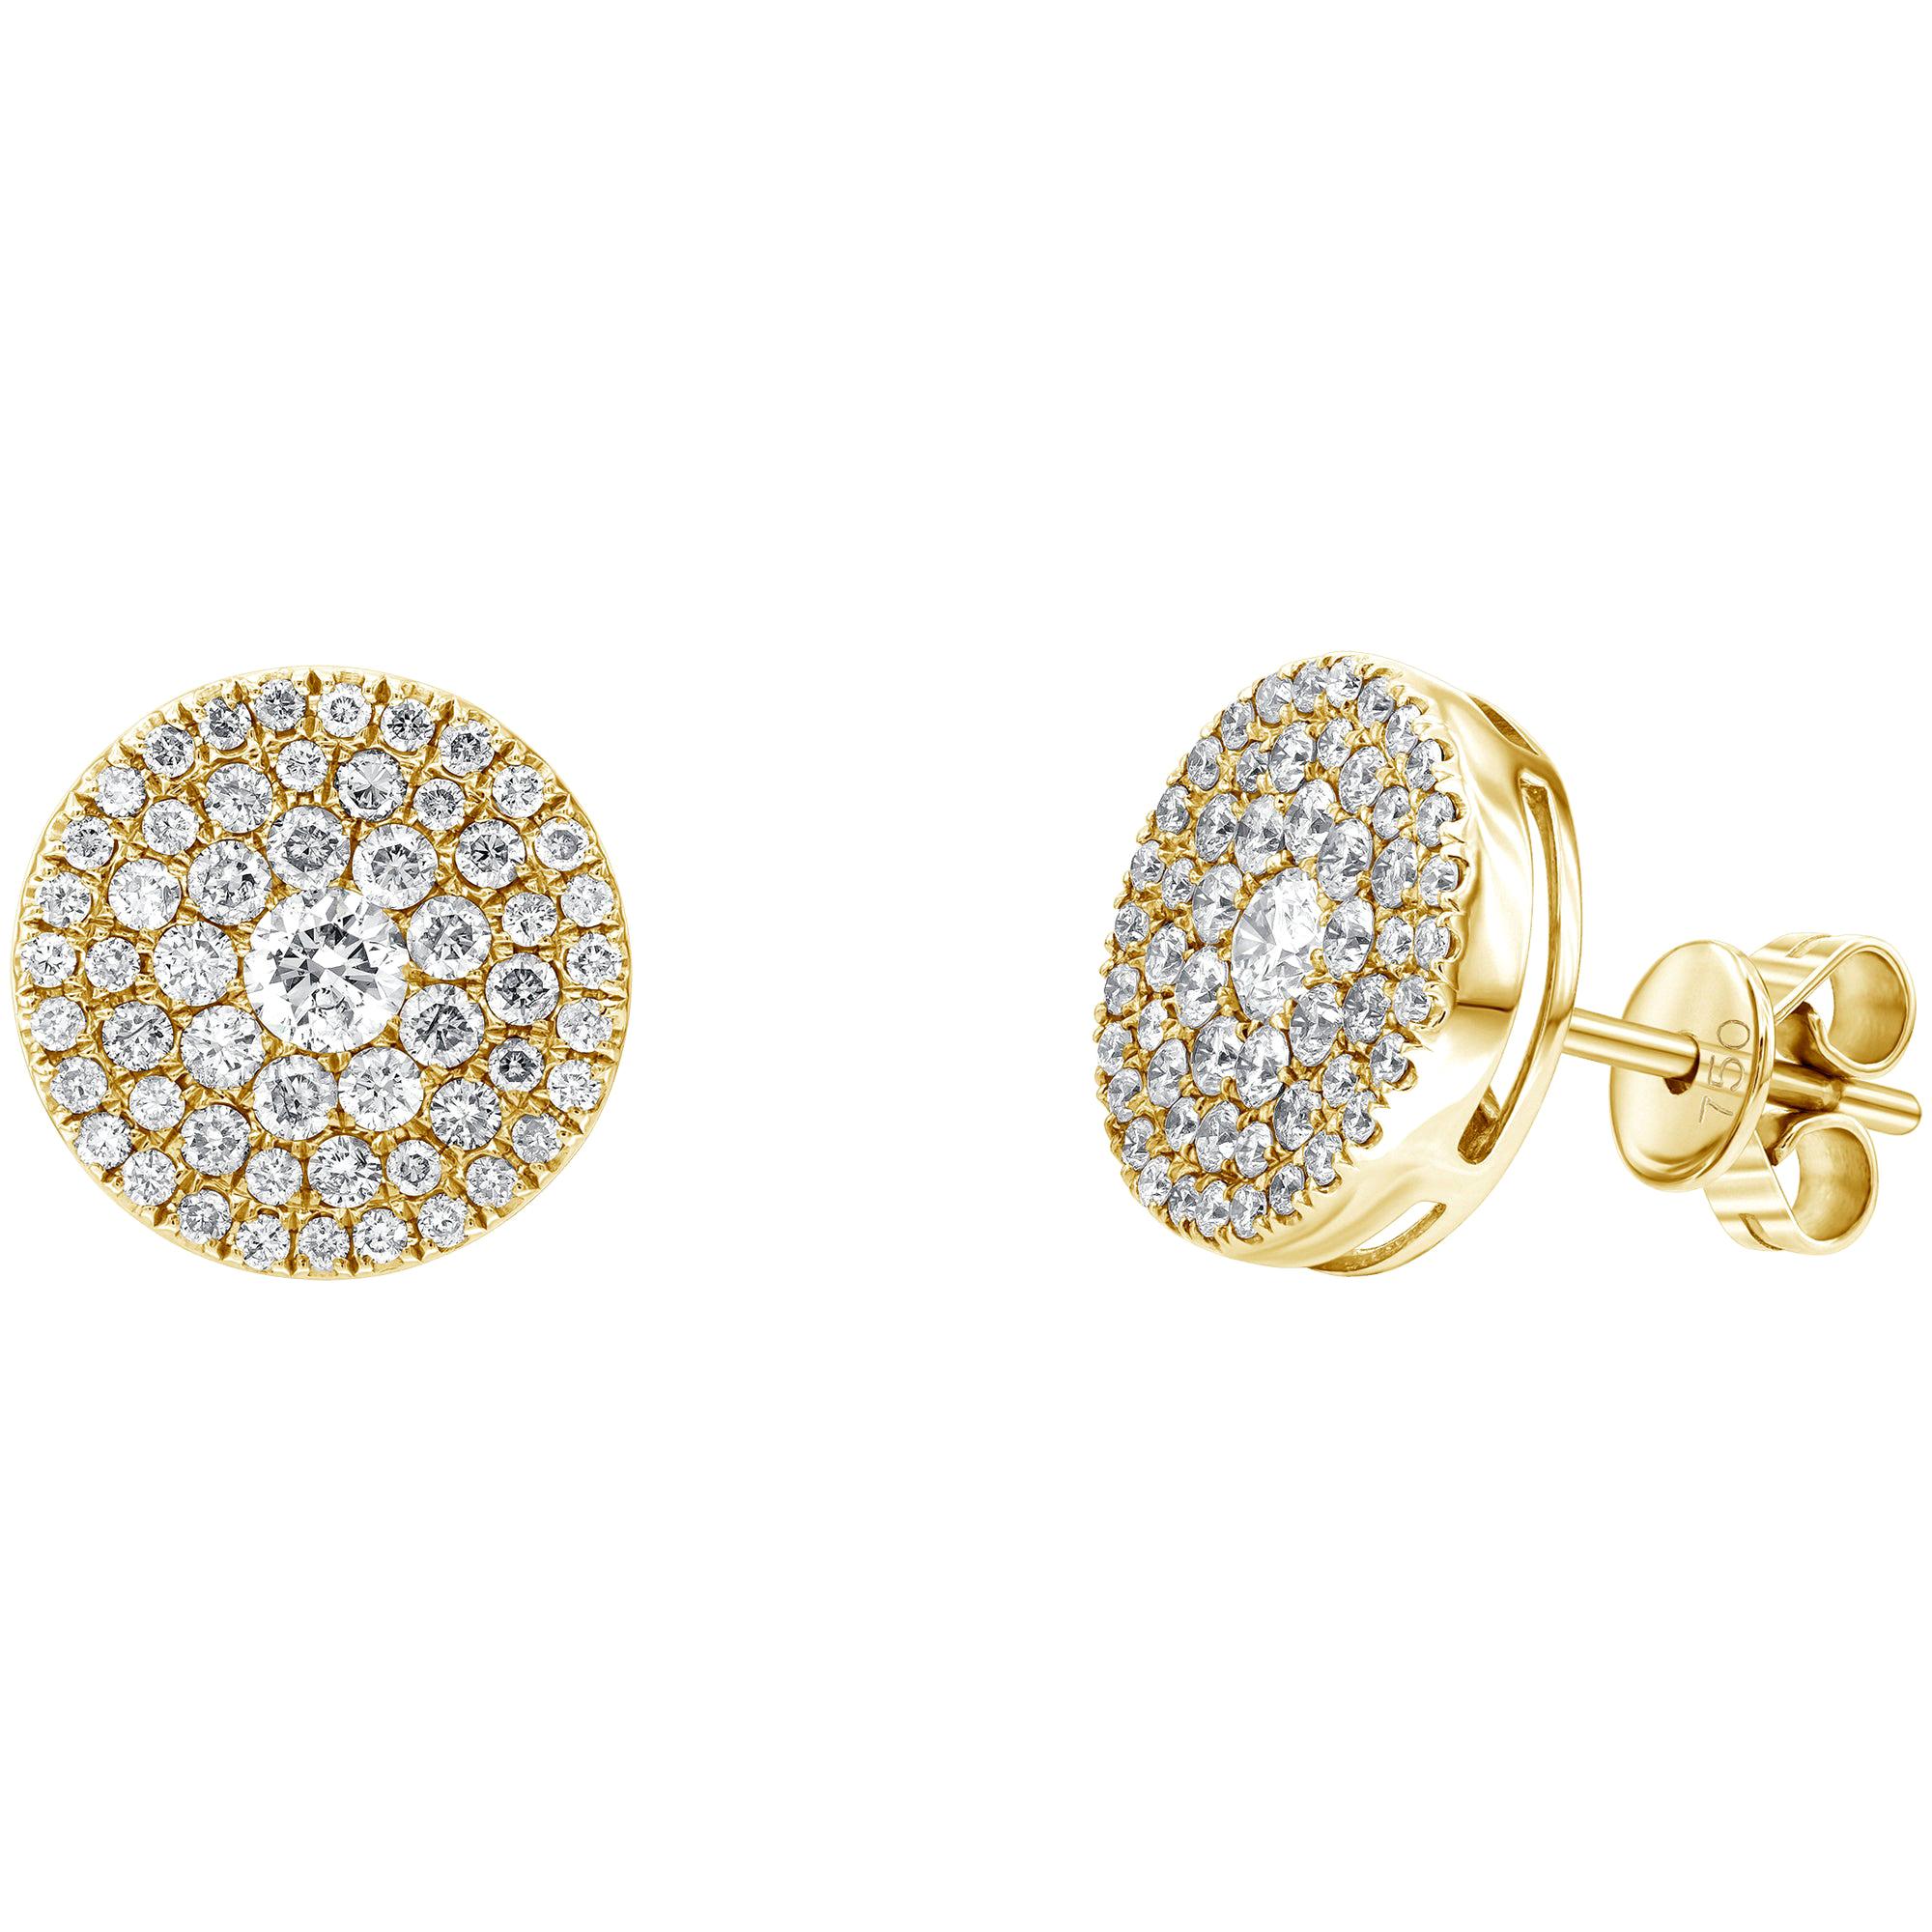 1.00 Carat Pave Set Cluster Round White Diamond 18 KT Yellow Gold Stud Earrings For Sale